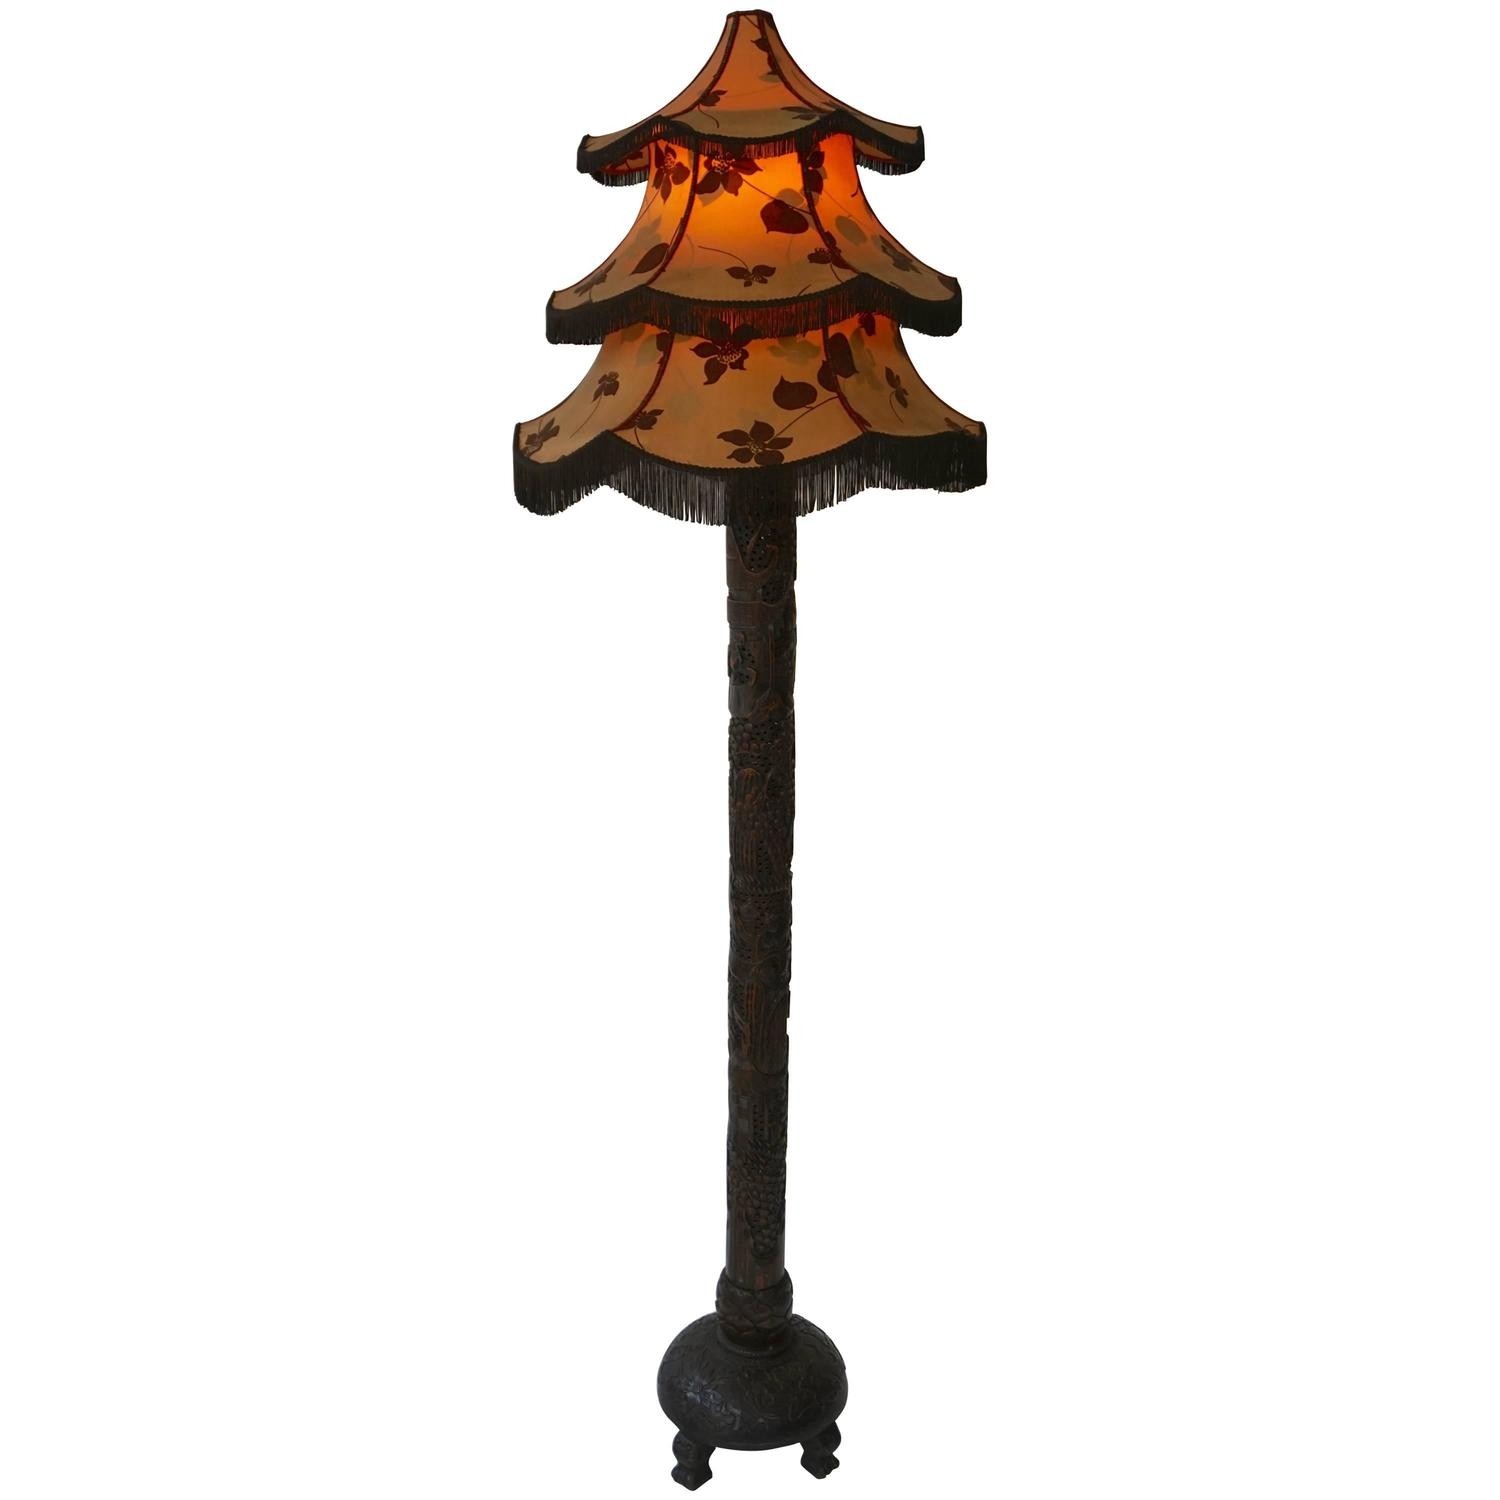 Chinese floor lamp for sale at 1stdibs